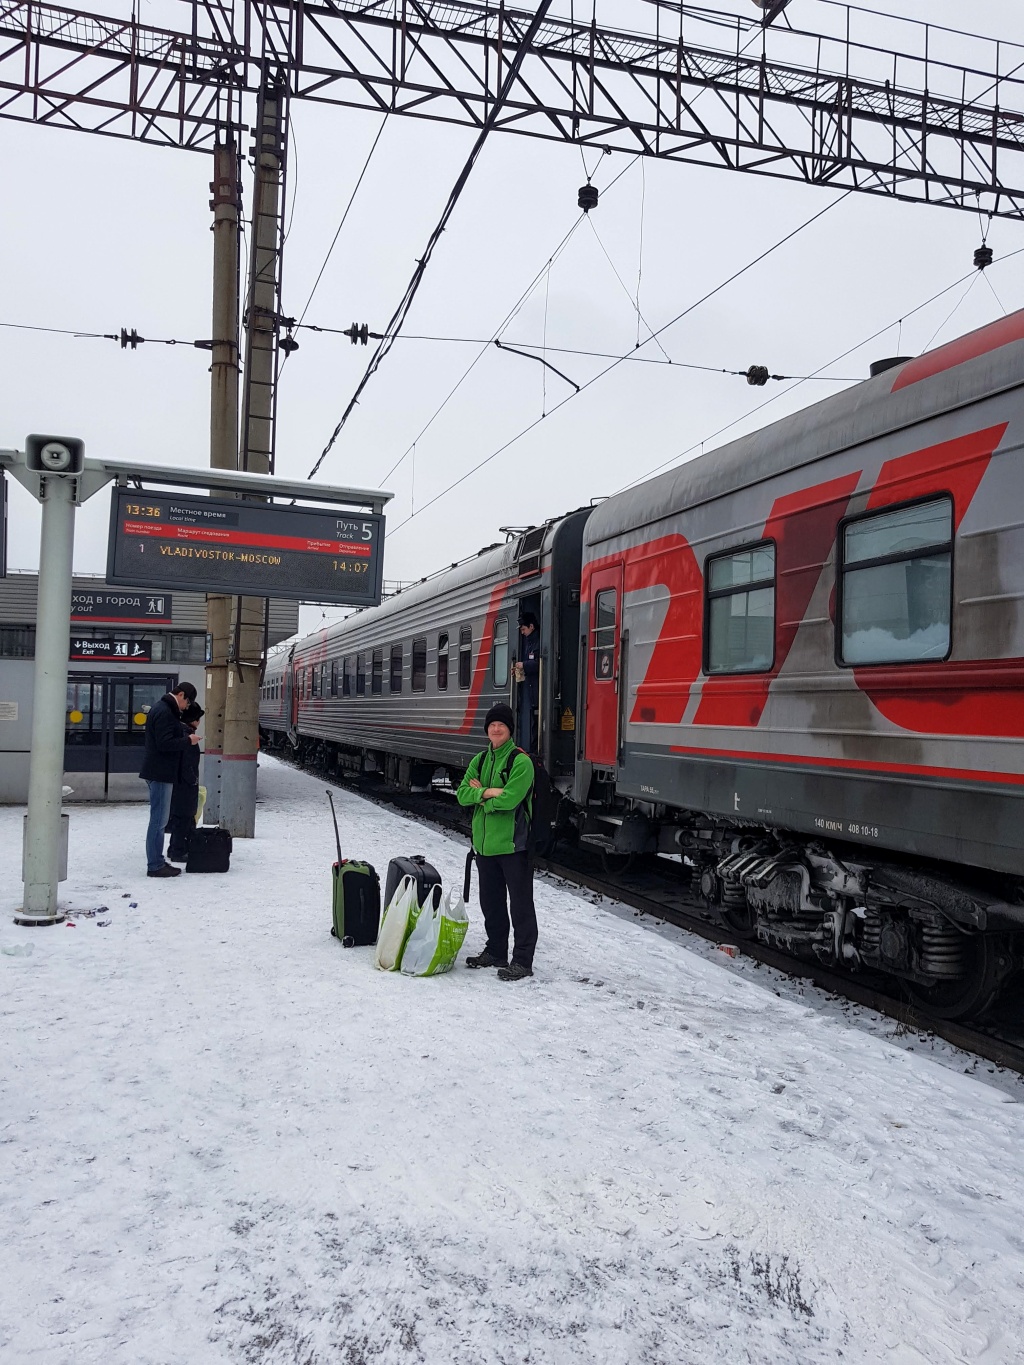 TEN INTERESTING FACTS ABOUT TRANS SIBERIAN RAILWAY